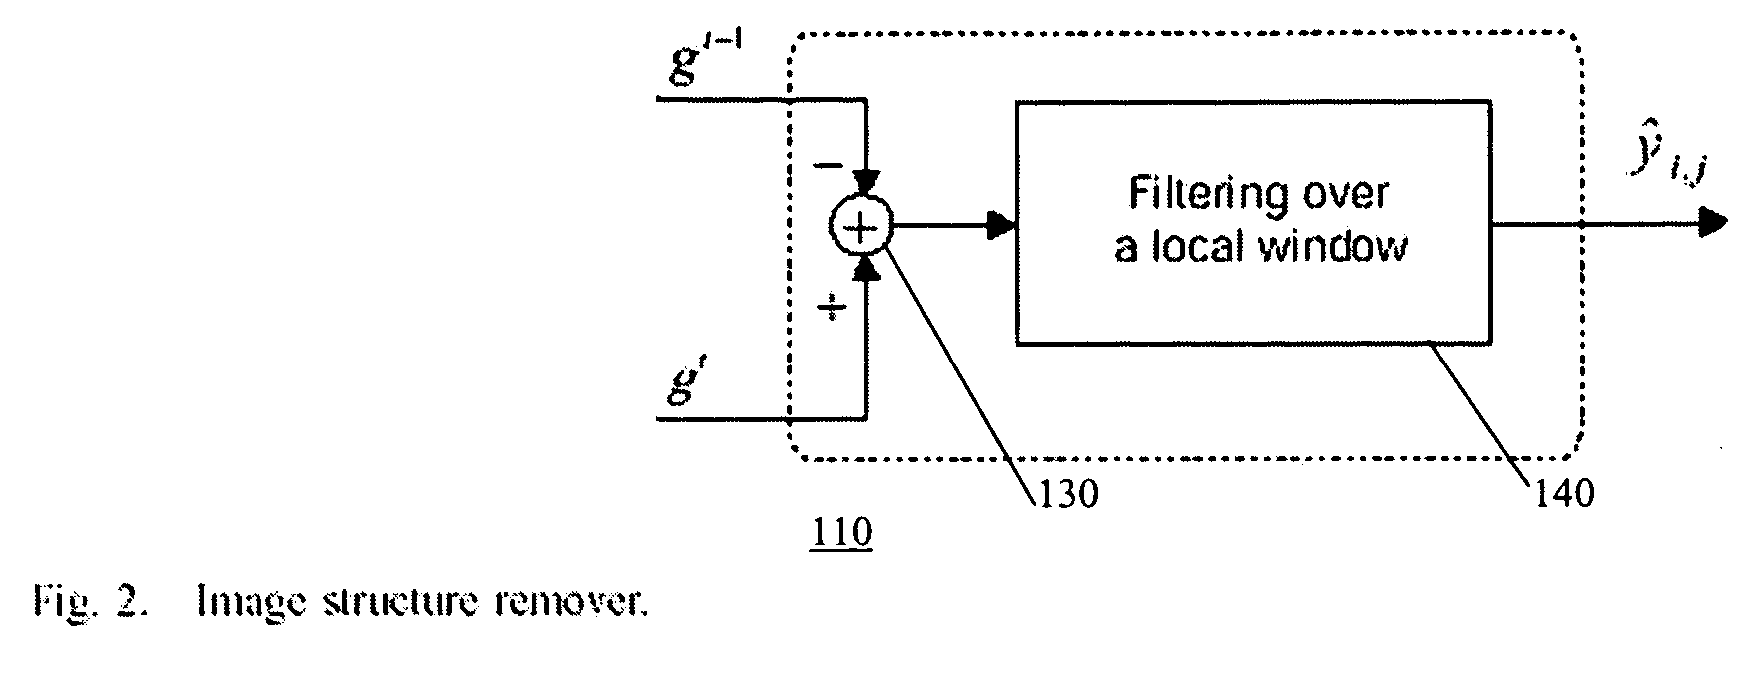 Methods to estimate noise variance from a video sequence